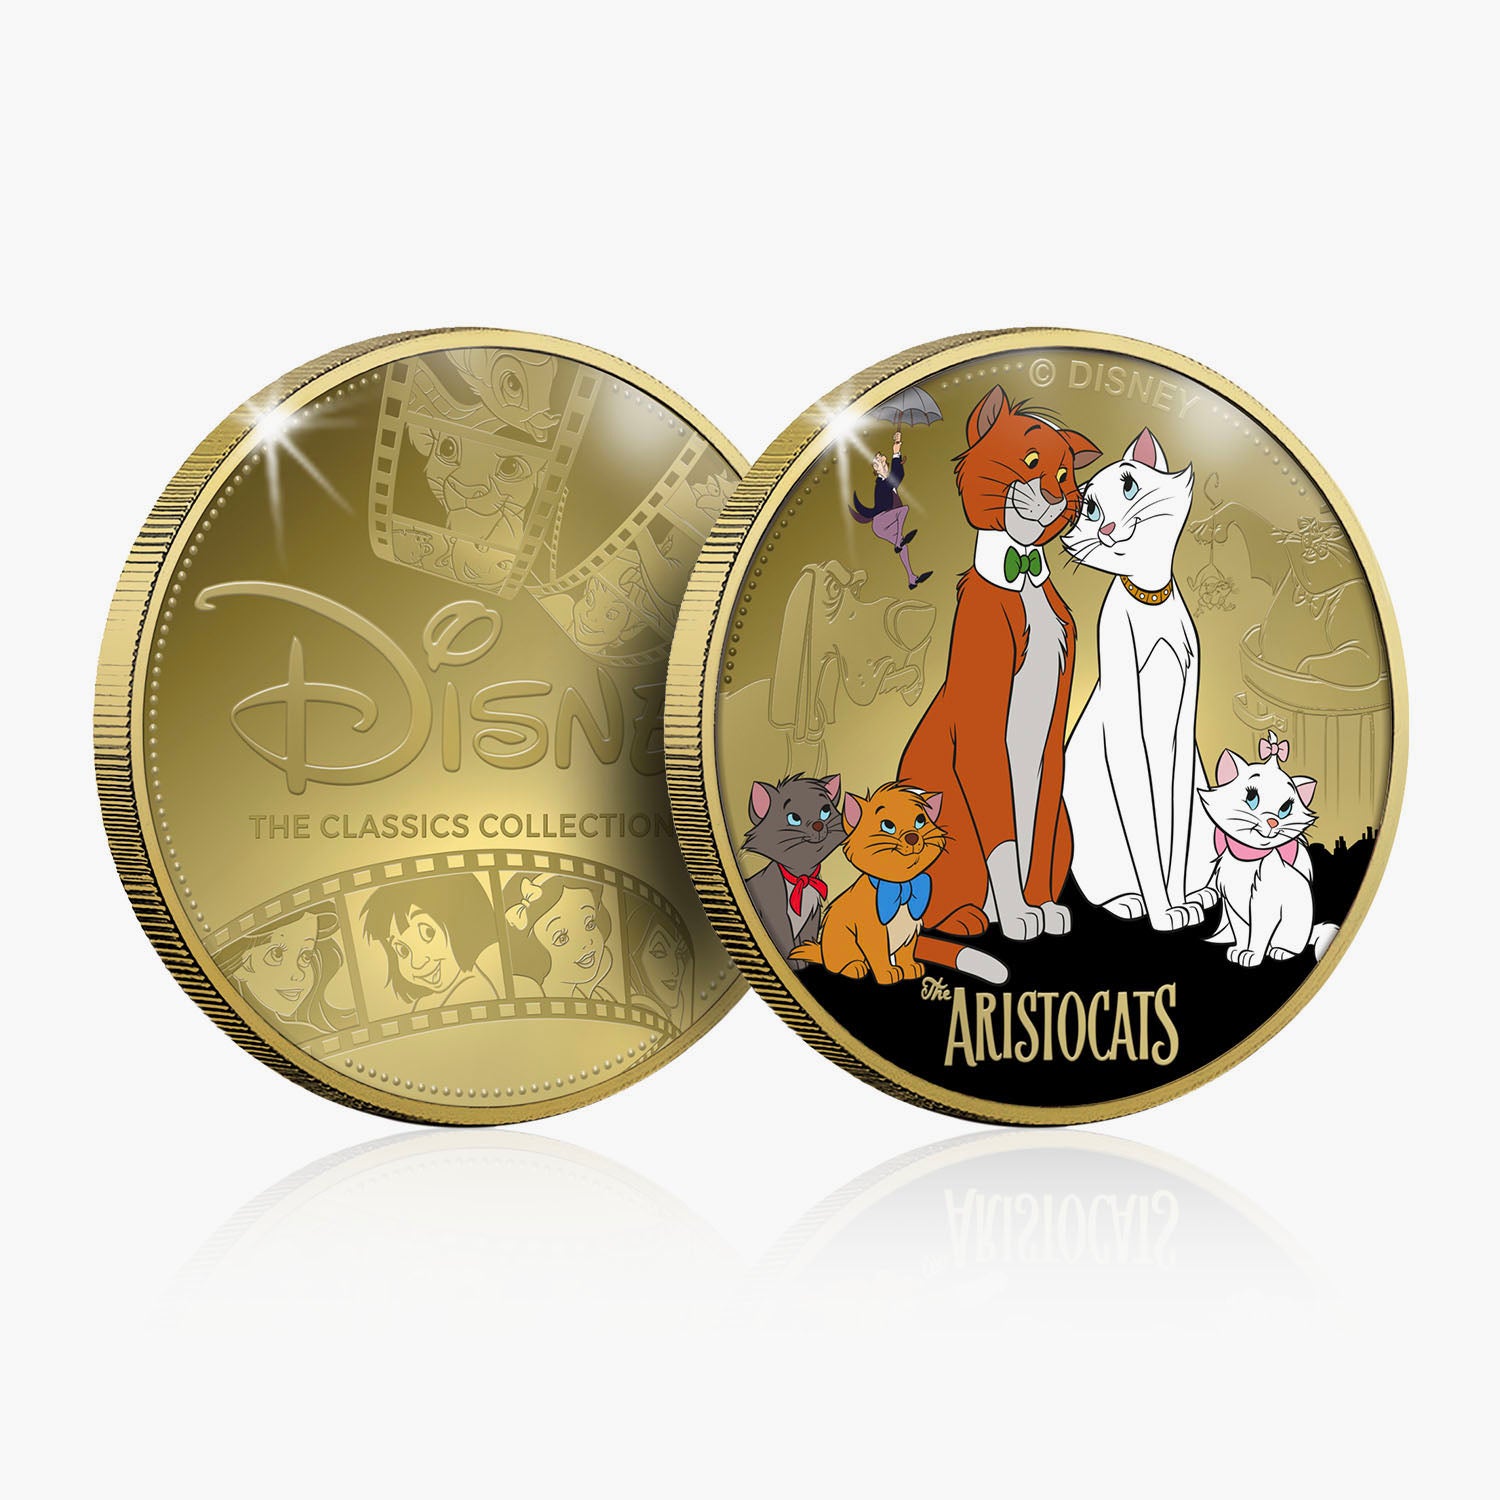 Aristocats Gold-Plated Commemorative